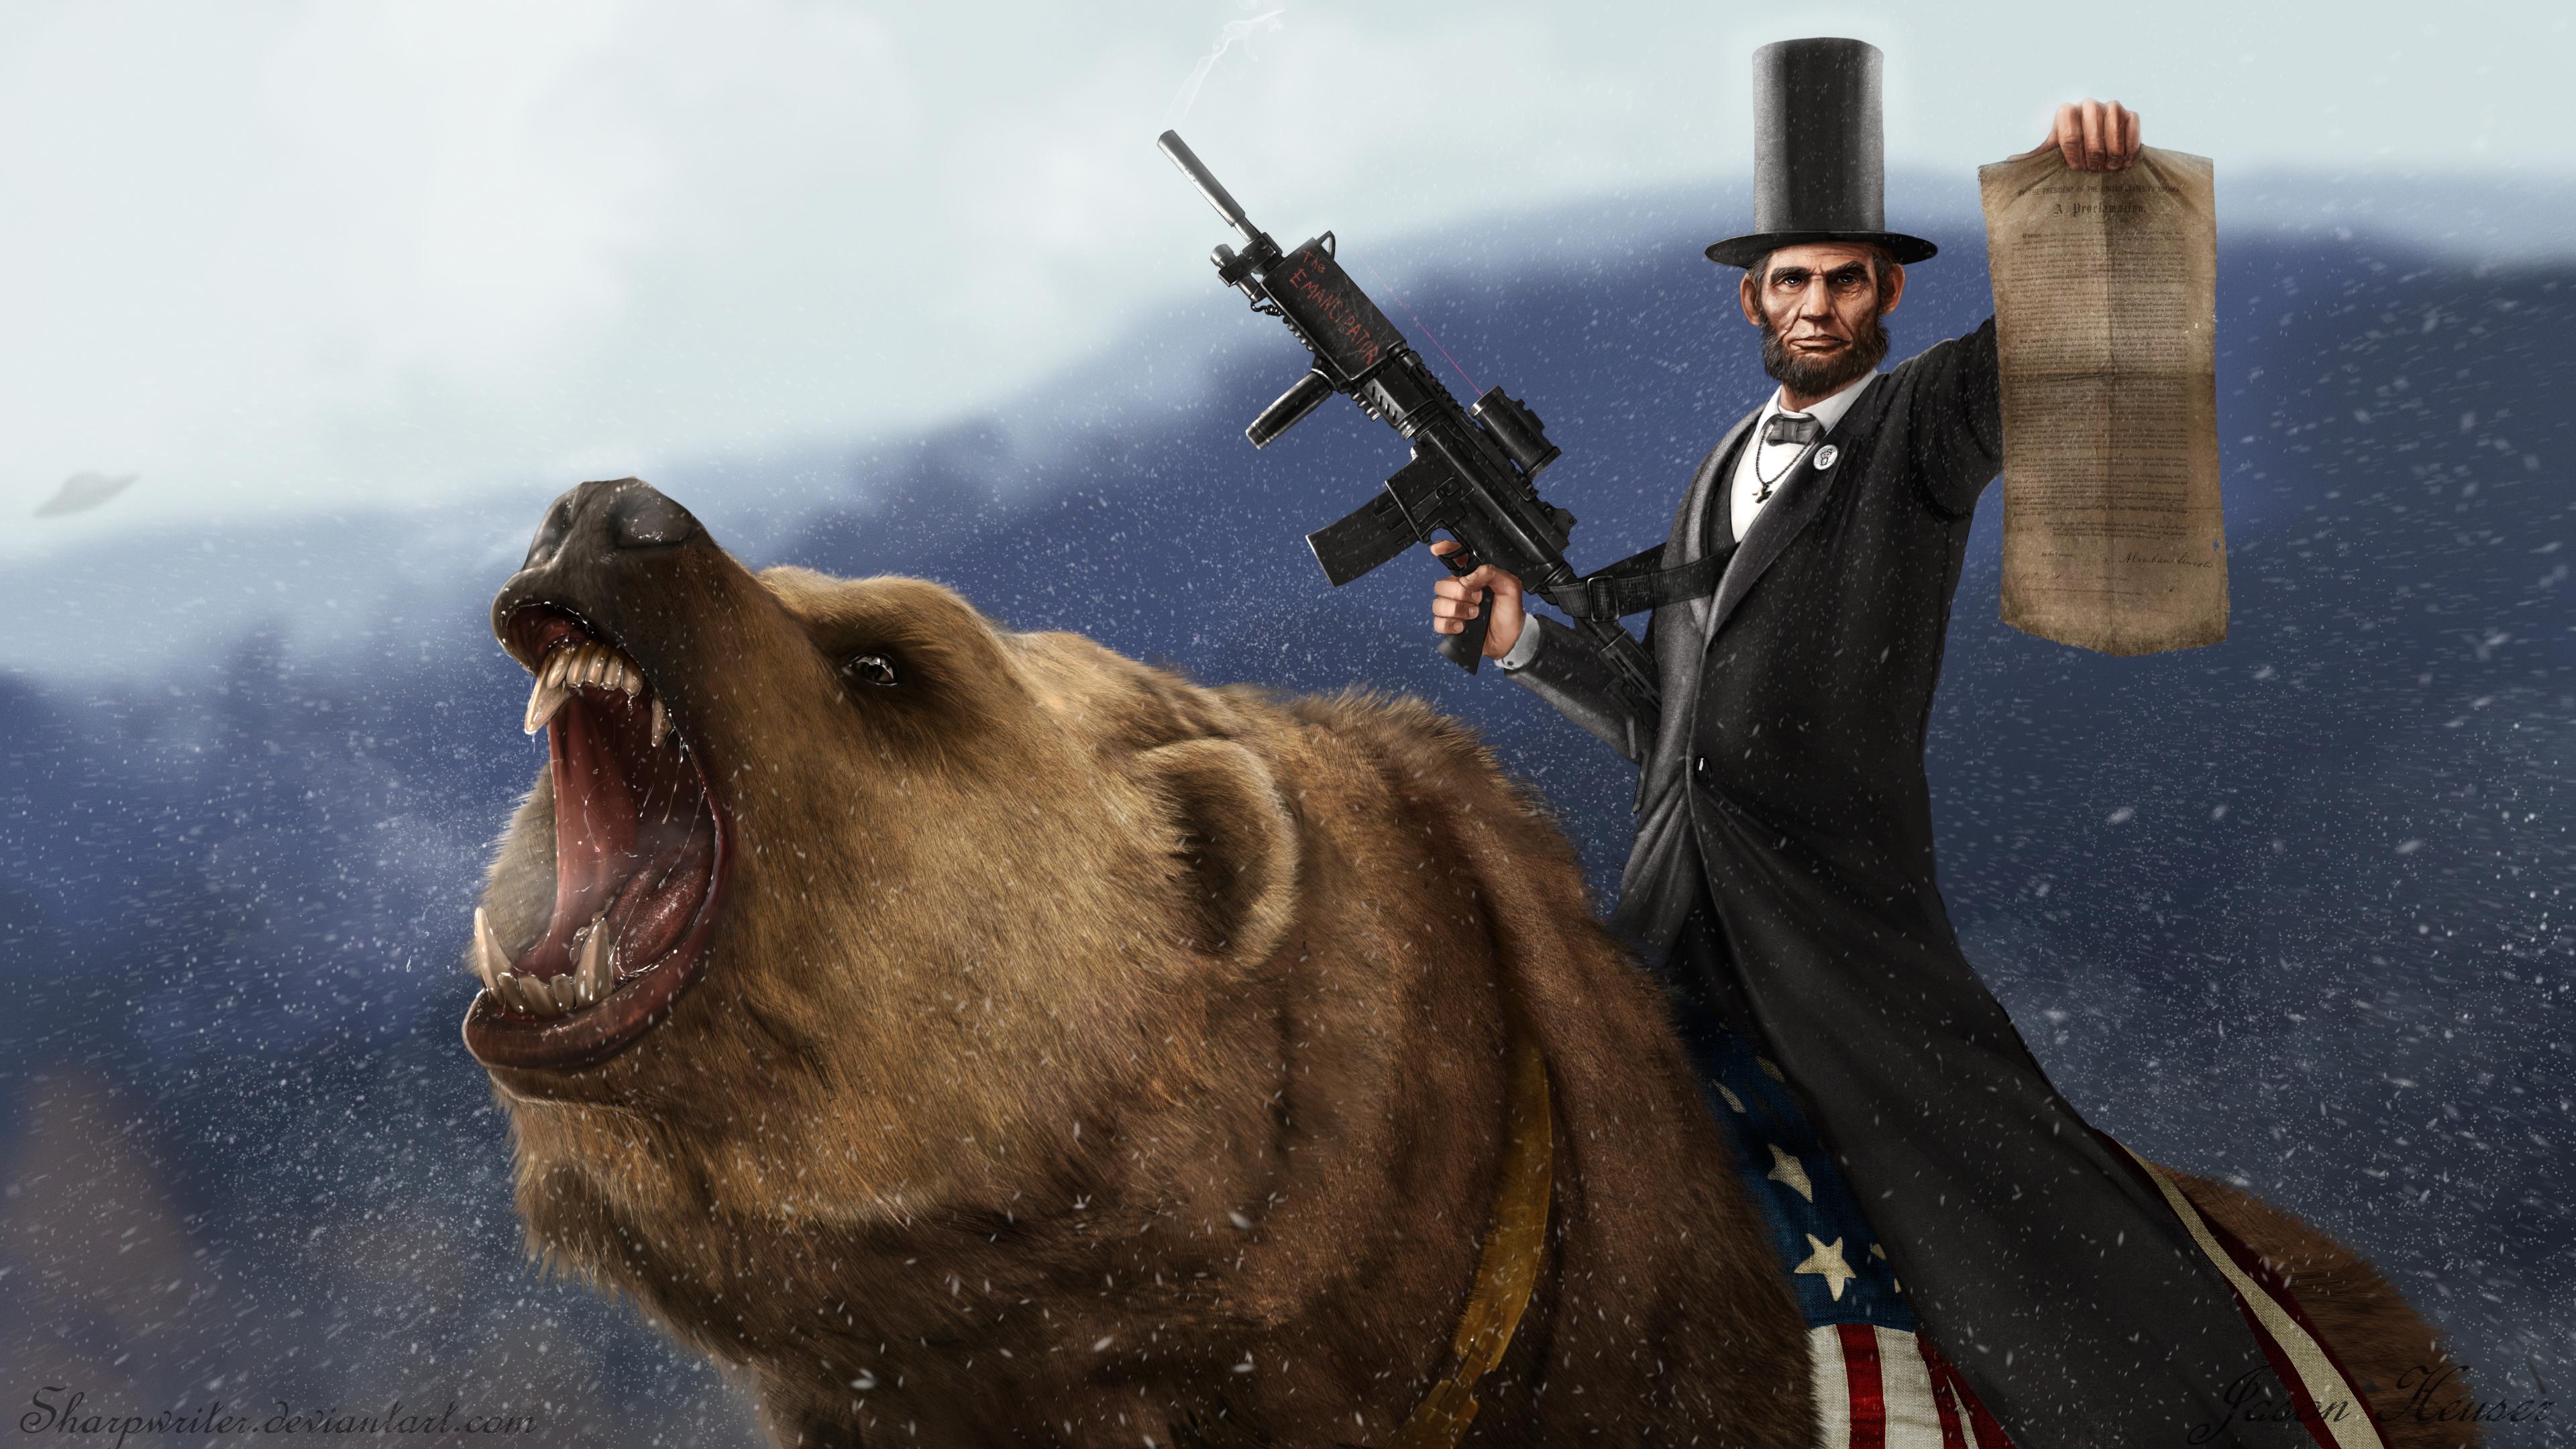 Hello here's Abe on a bear, cause why not?